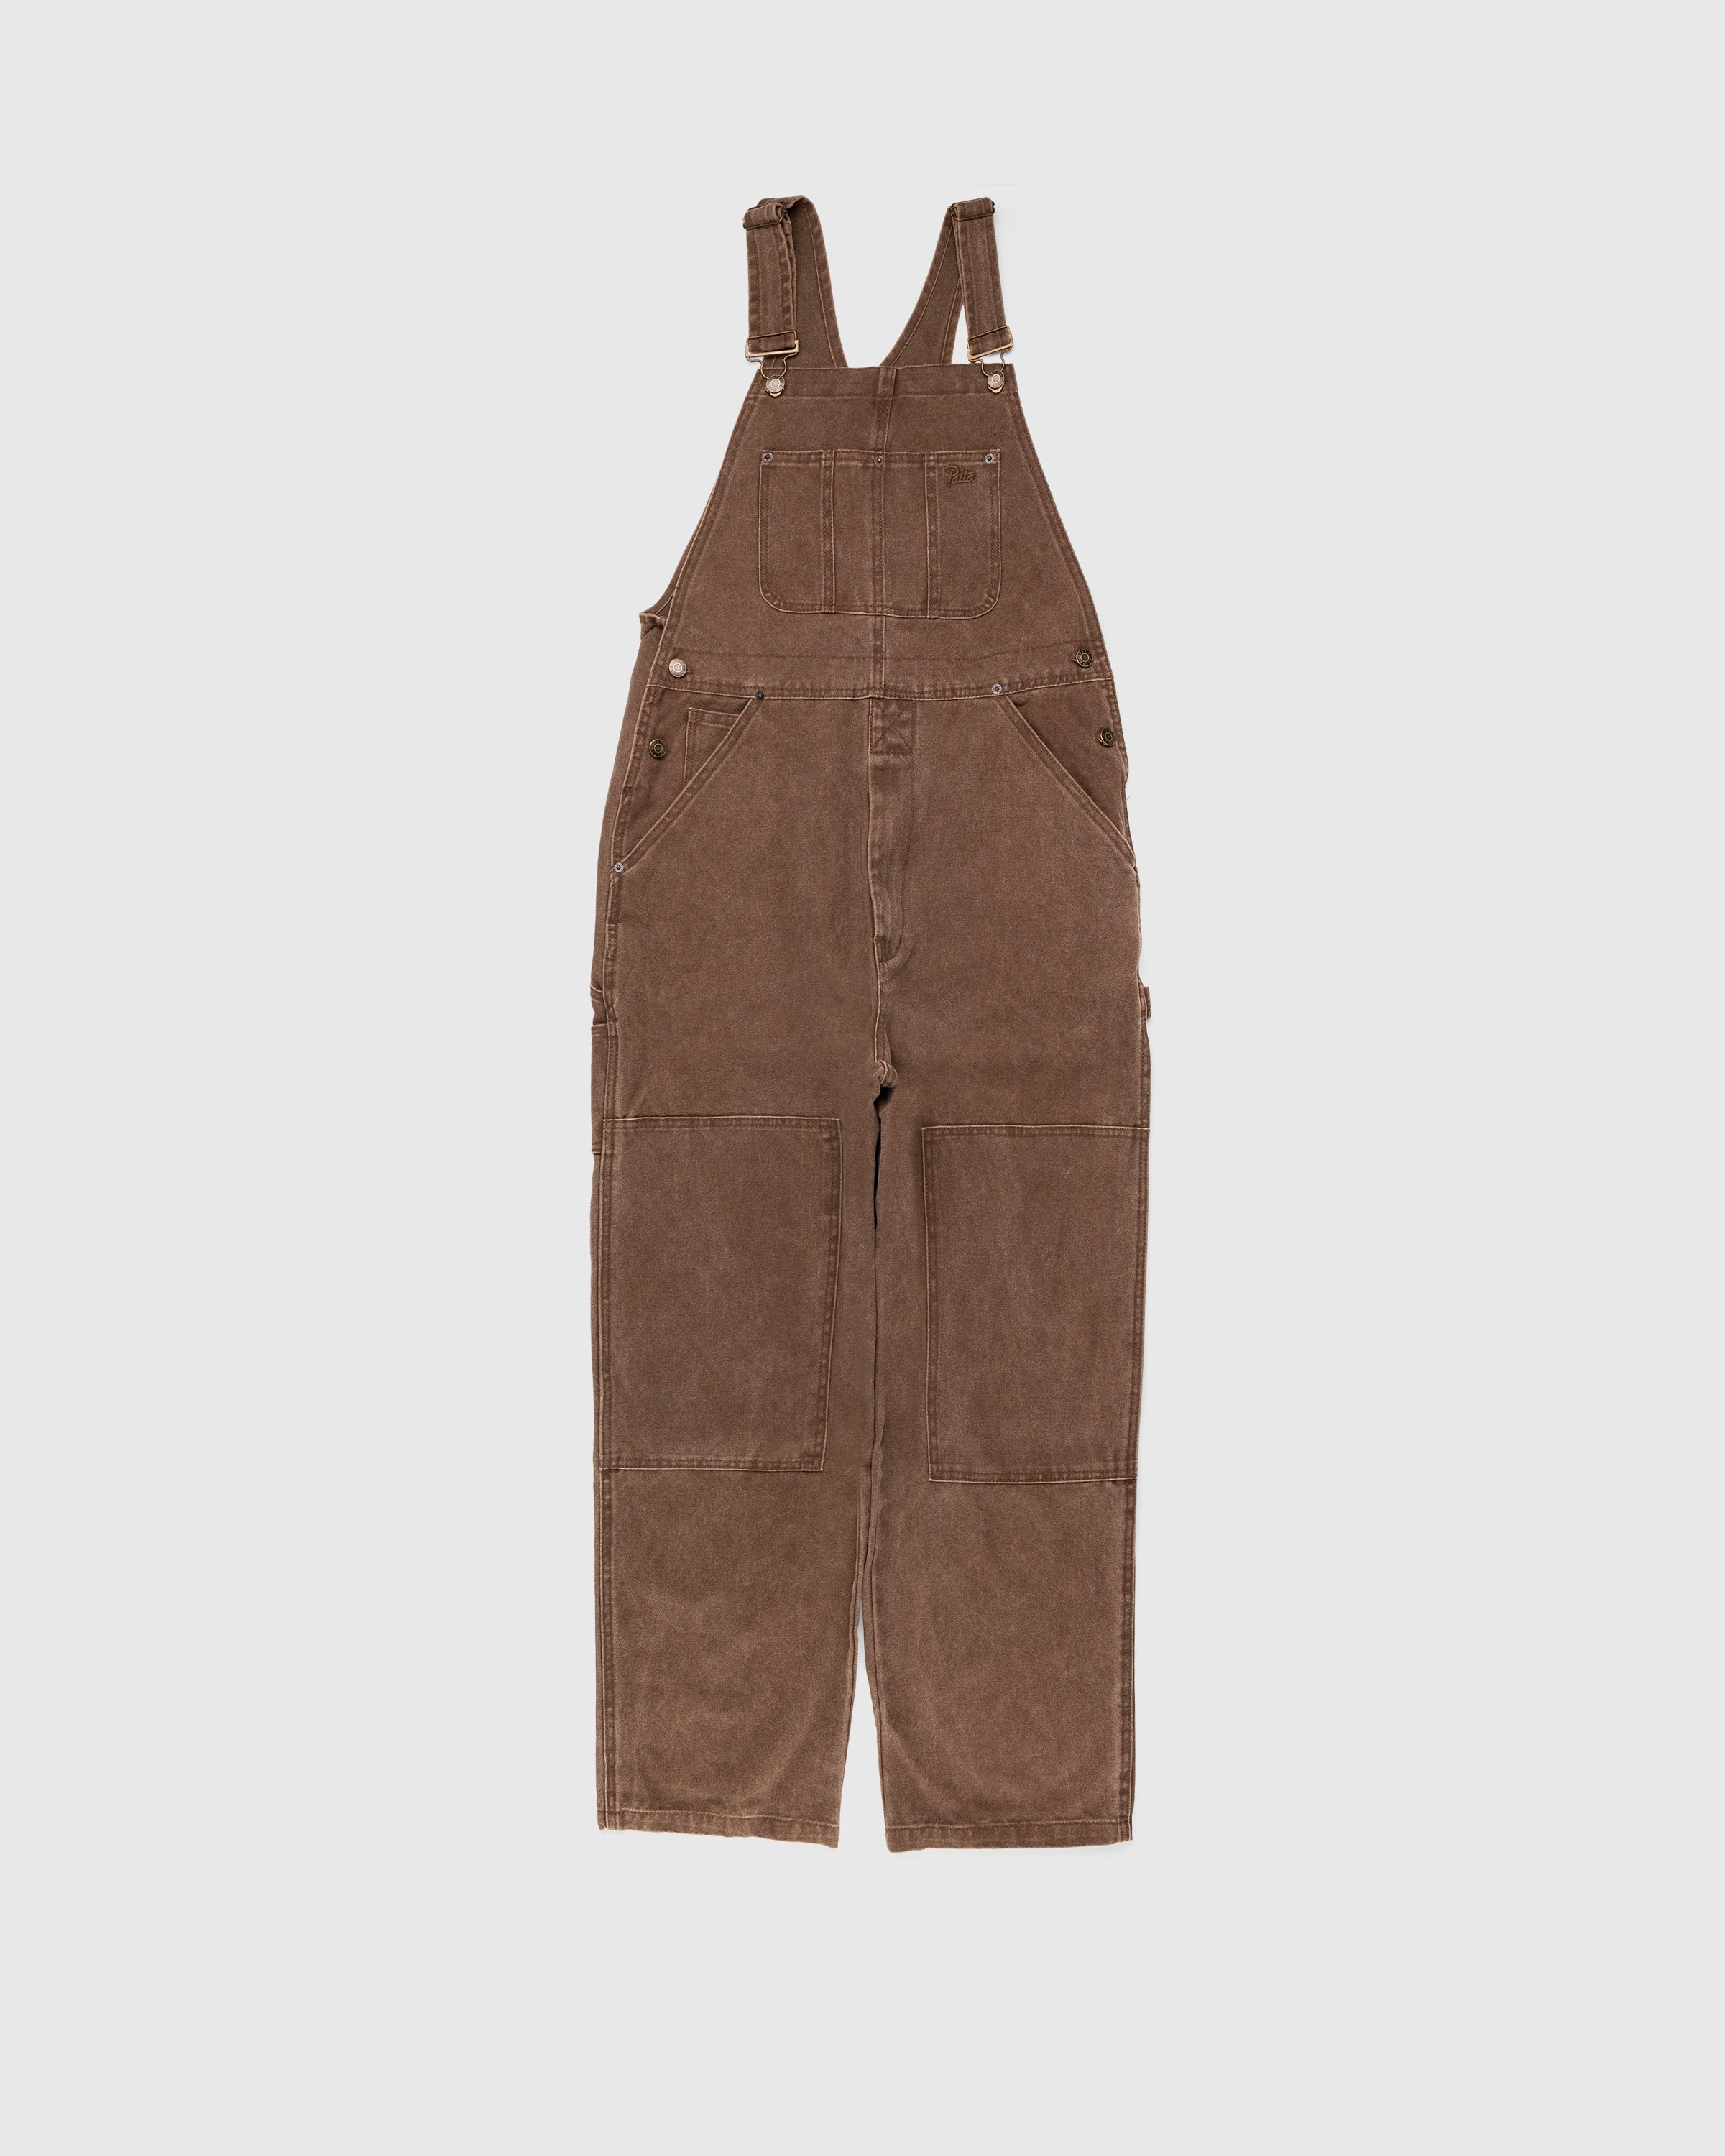 Patta - Canvas Overalls - Clothing - Brown - Image 1